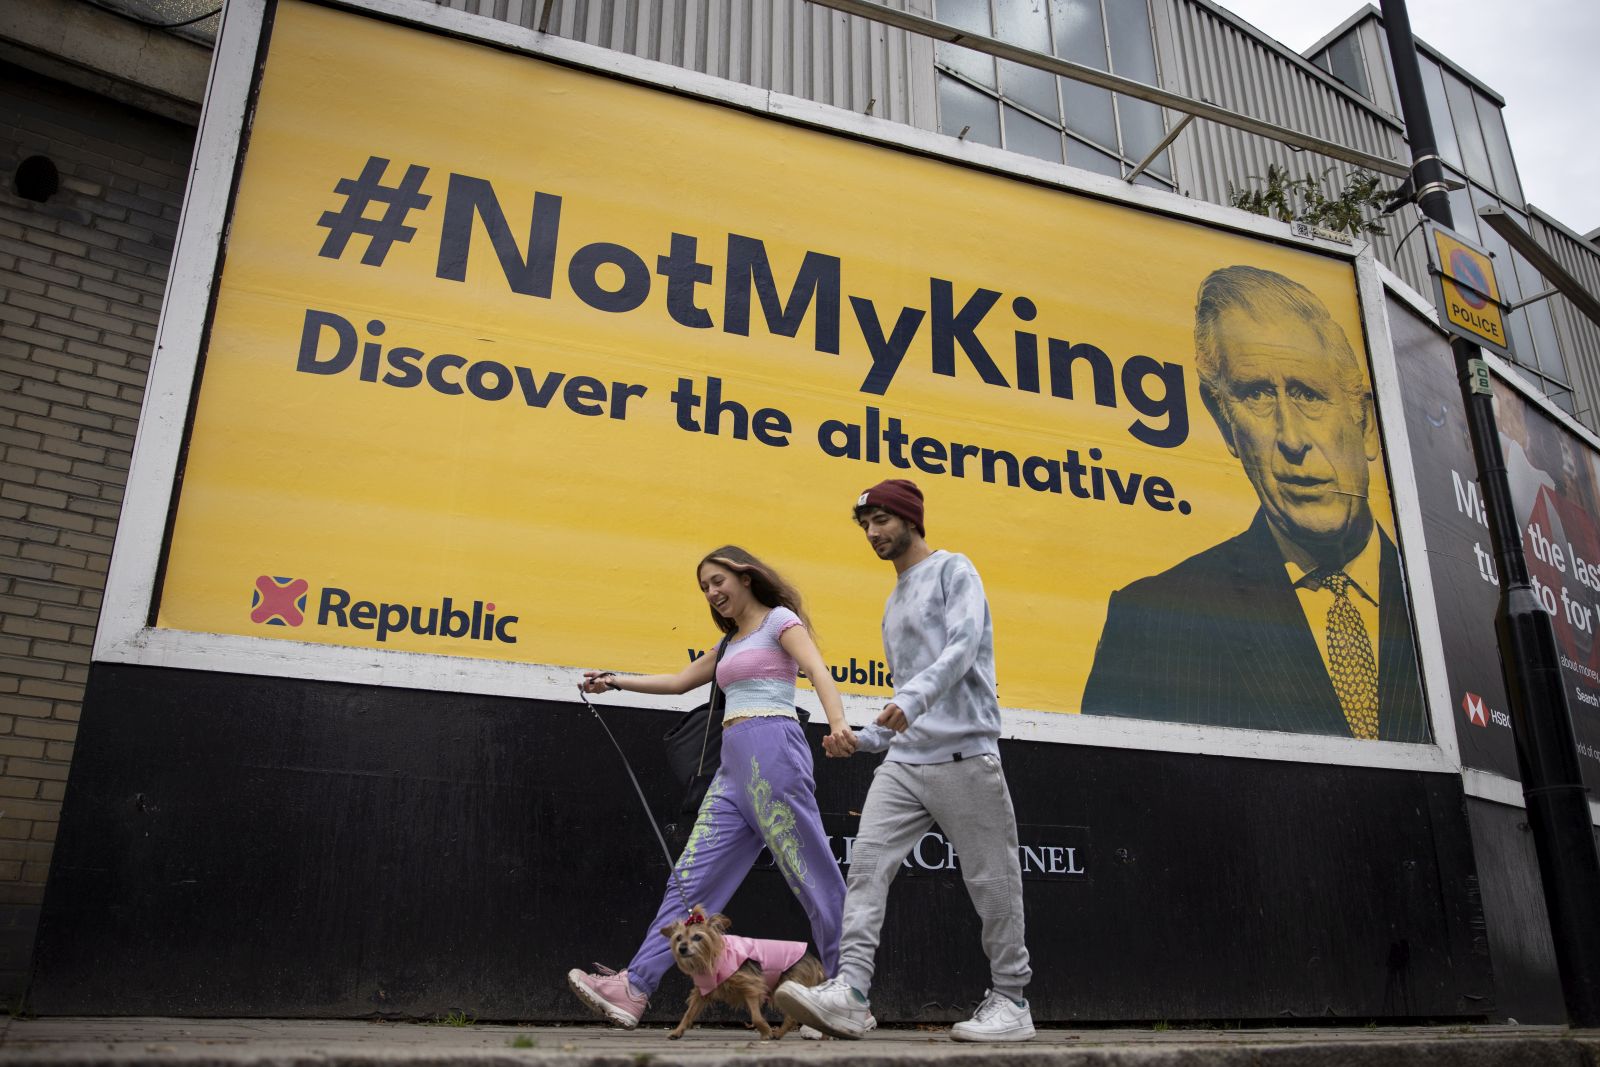 epa10277236 People walk past an anti-monarchy billboard featuring 'NotMyKing' hashtag and picture of Britain's King Charles III, made by the pressure group Republic, in London, Britain, 31 October 2022. Activists campaigning for the abolition of the monarchy in Britain make their first push since the death of Queen Elizabeth II with the launch of the billboards in 18 towns.  EPA/TOLGA AKMEN